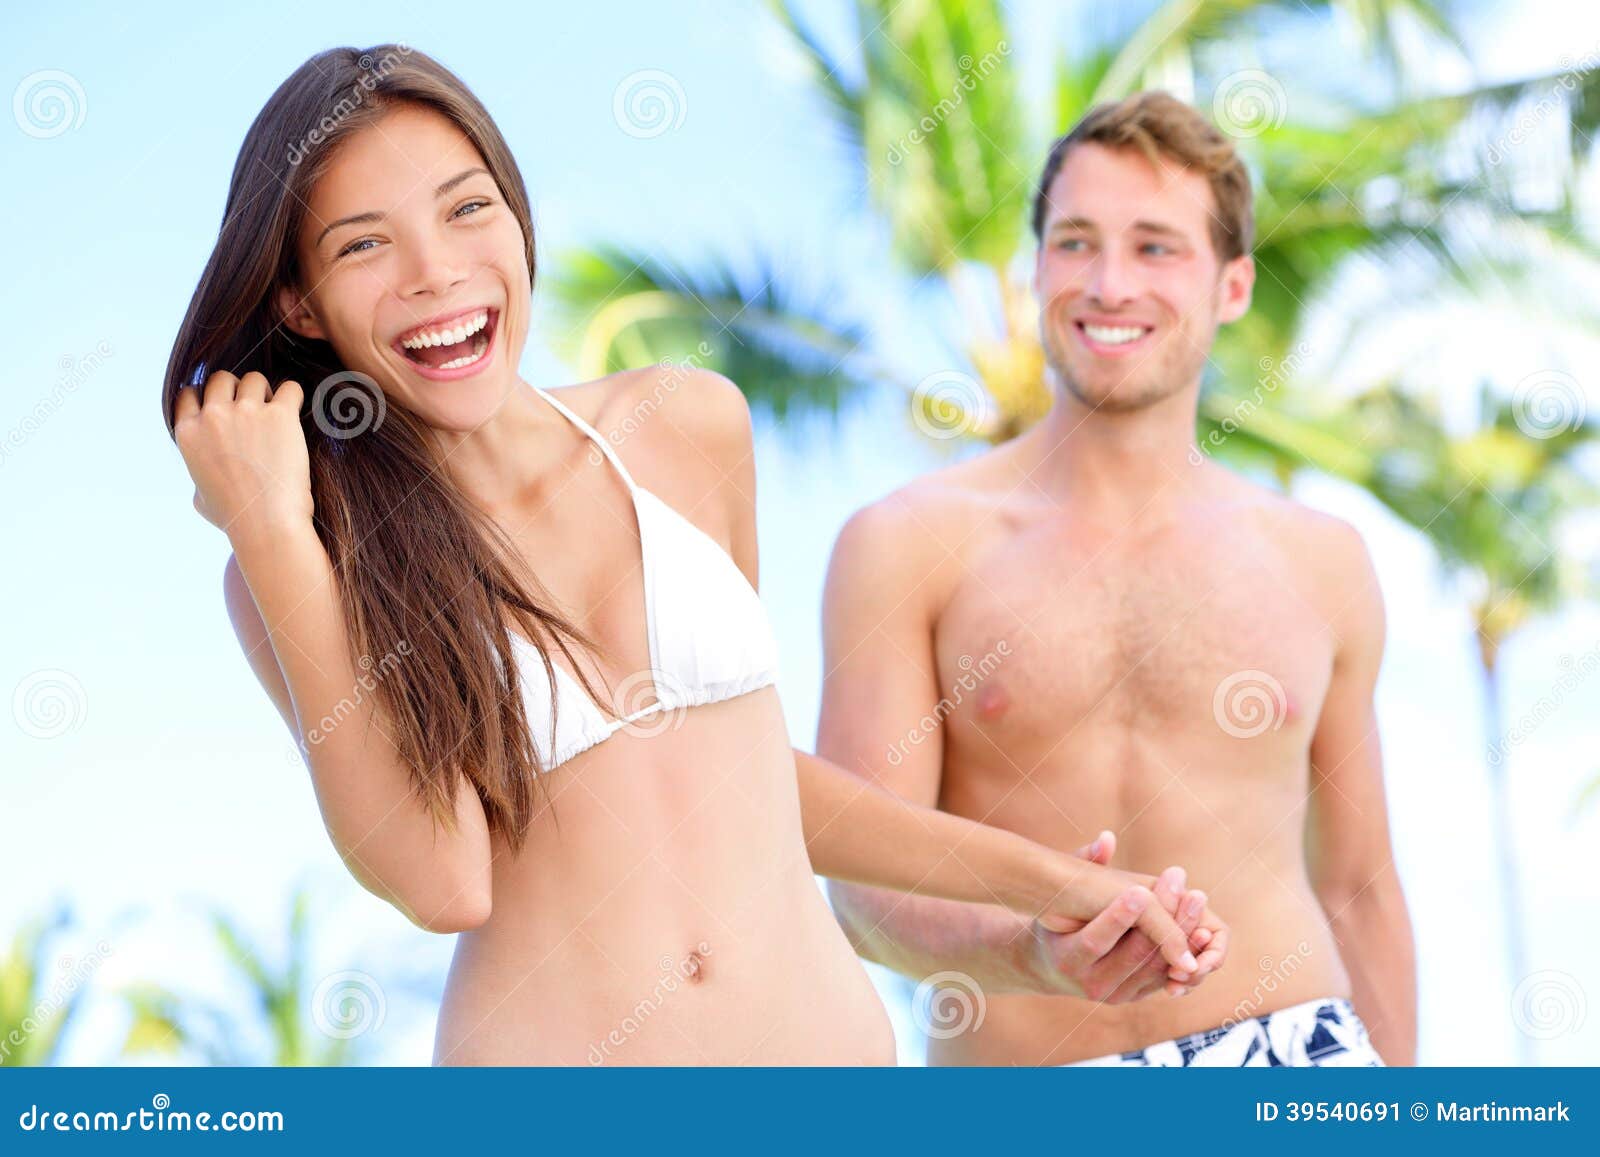 Couple Fun at Beach Holding Hands Stock Image image picture